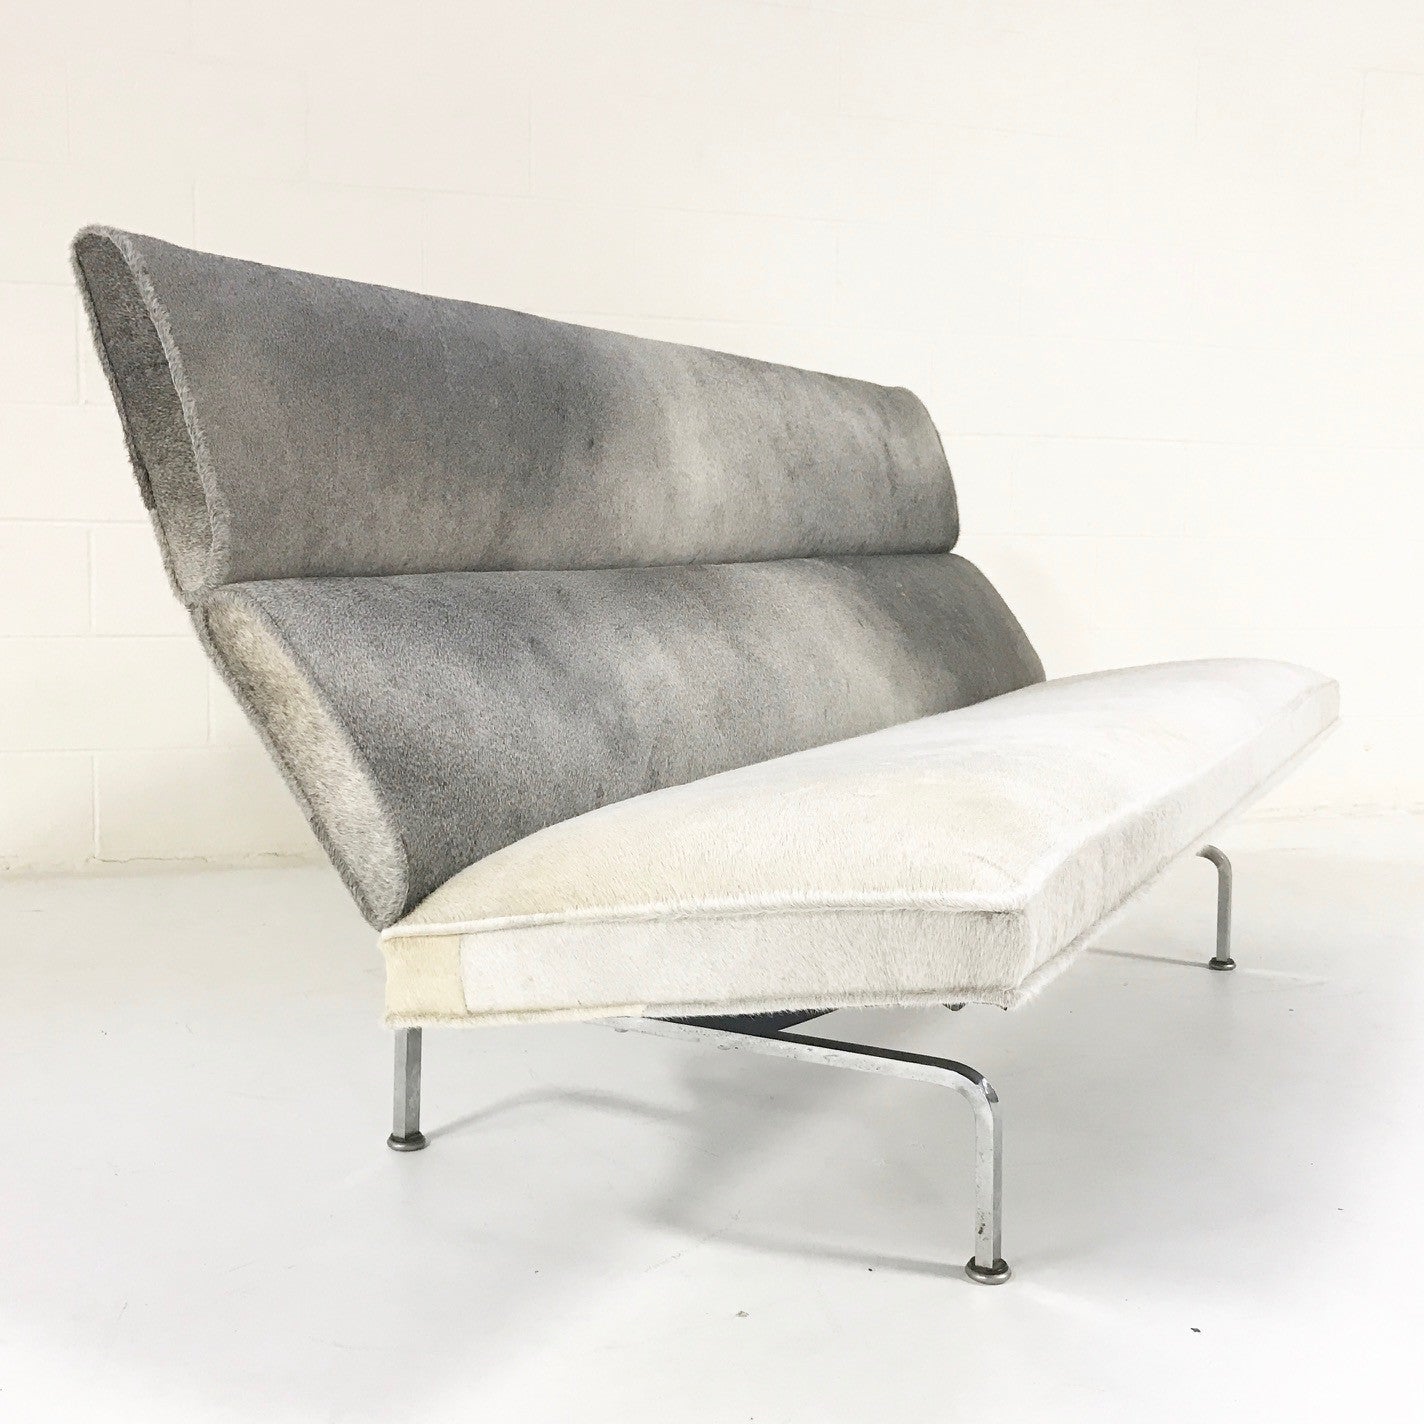 Compact Sofa in Brazilian Cowhide - FORSYTH